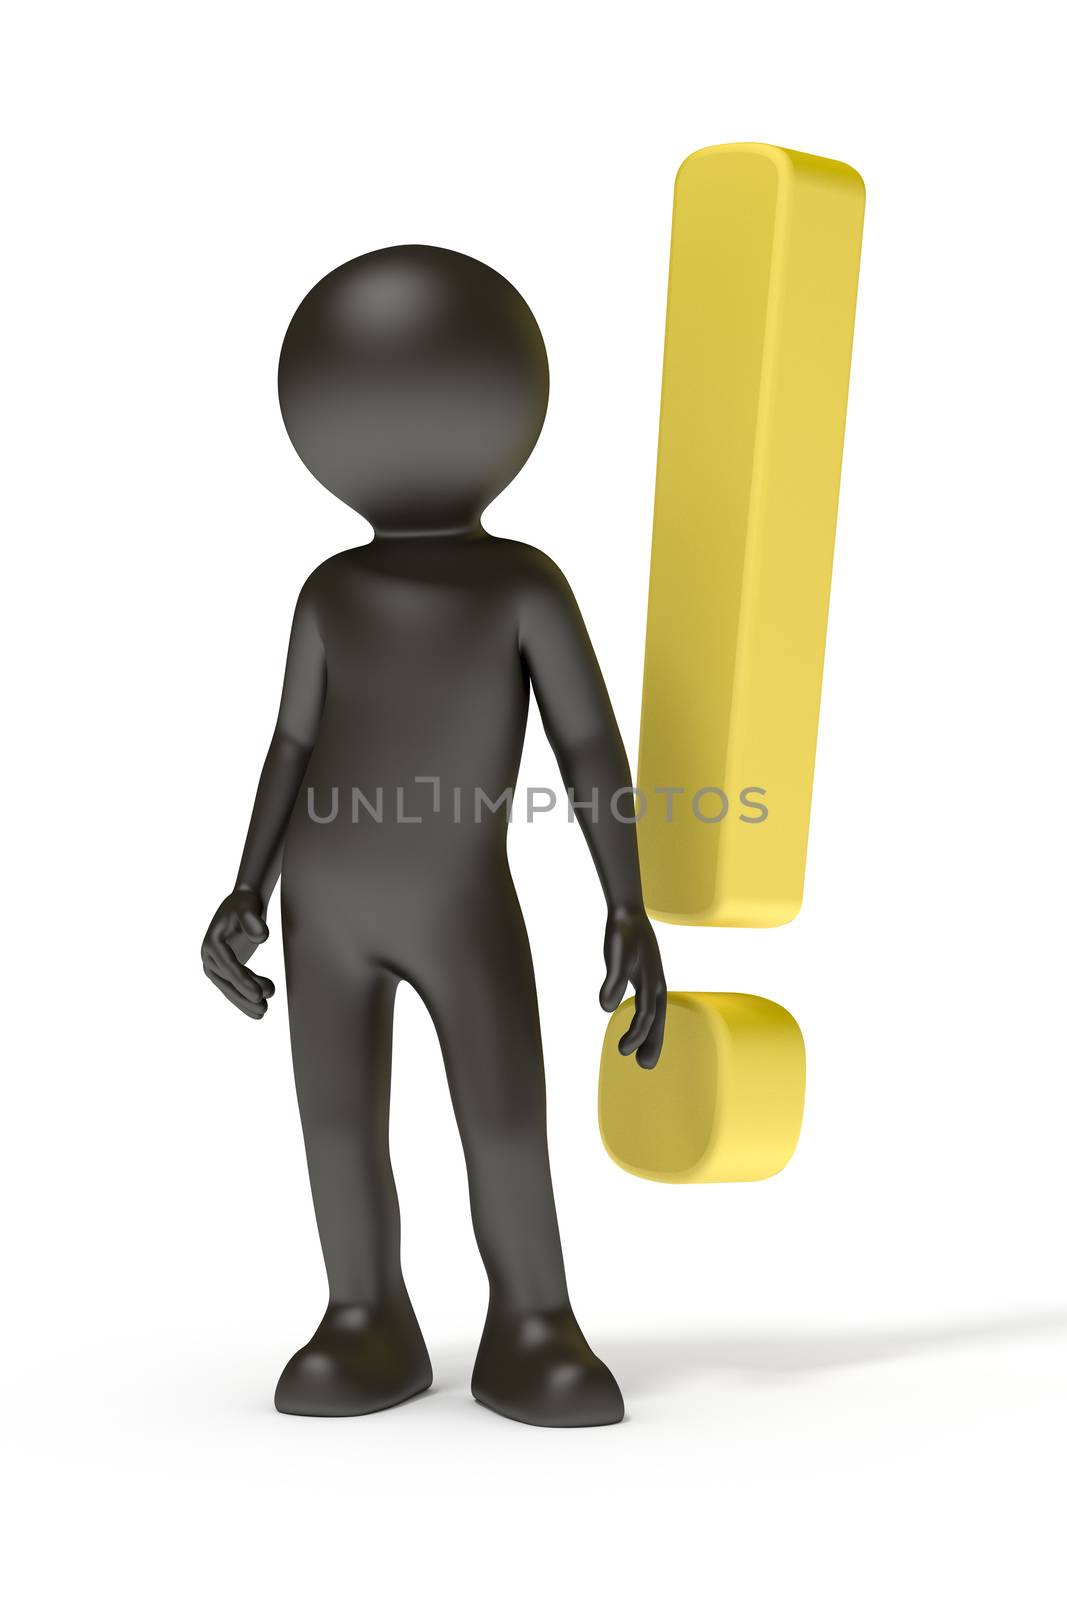 An image of a black man and a yellow exclamation mark